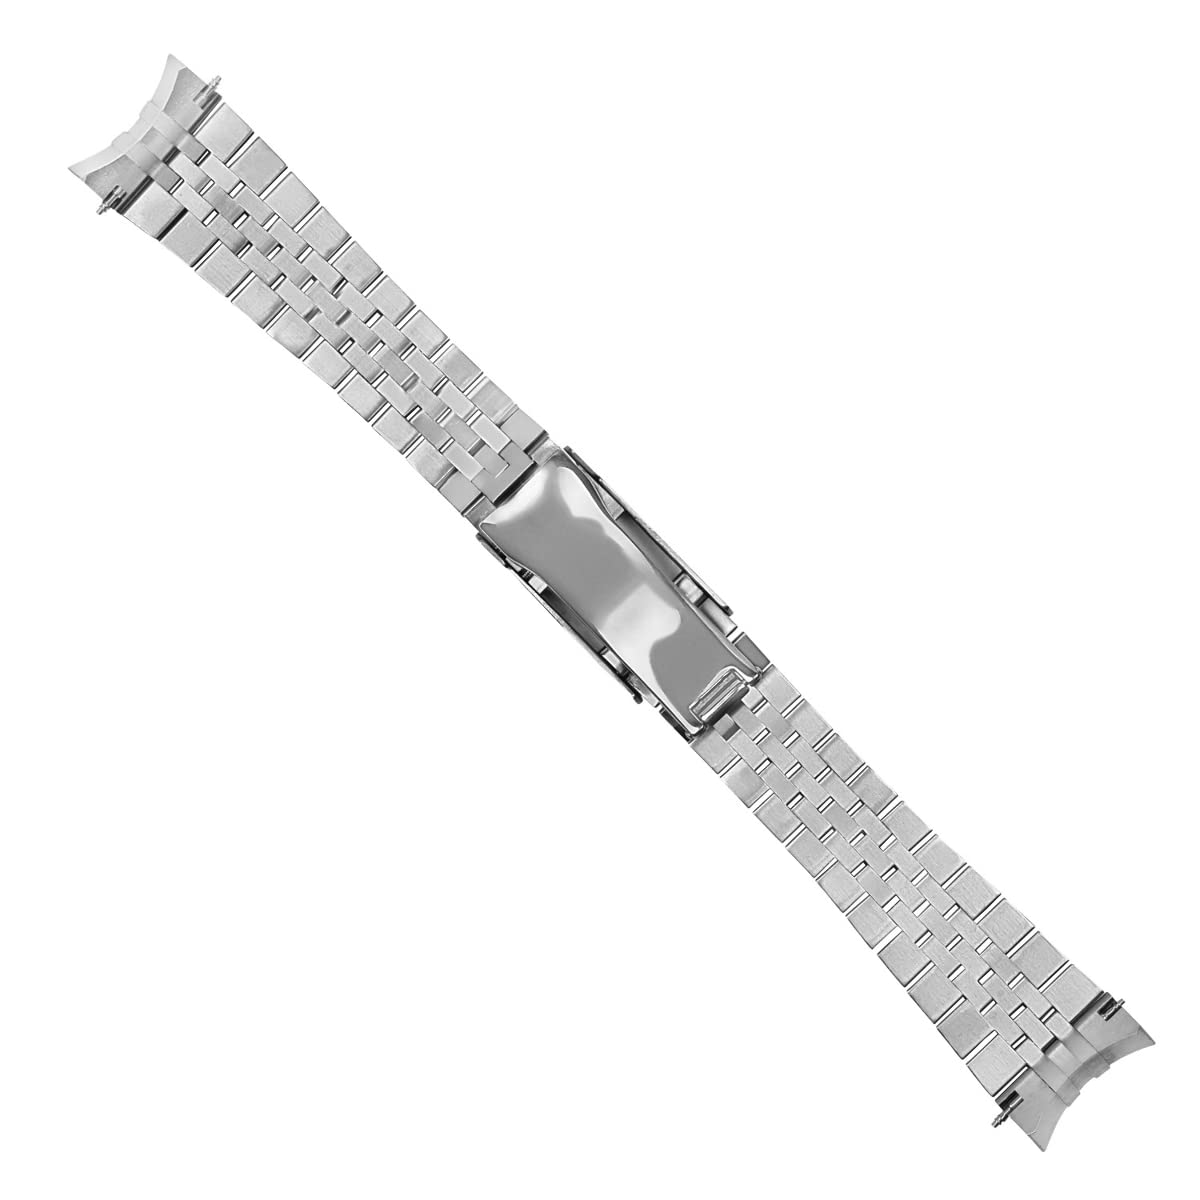 Ewatchparts JUBILEE WATCH BAND SOLID LINK COMPATIBLE WITH ROLEX DATEJUST GLIDE LOCK CLASP 21MM HEAVY S/S